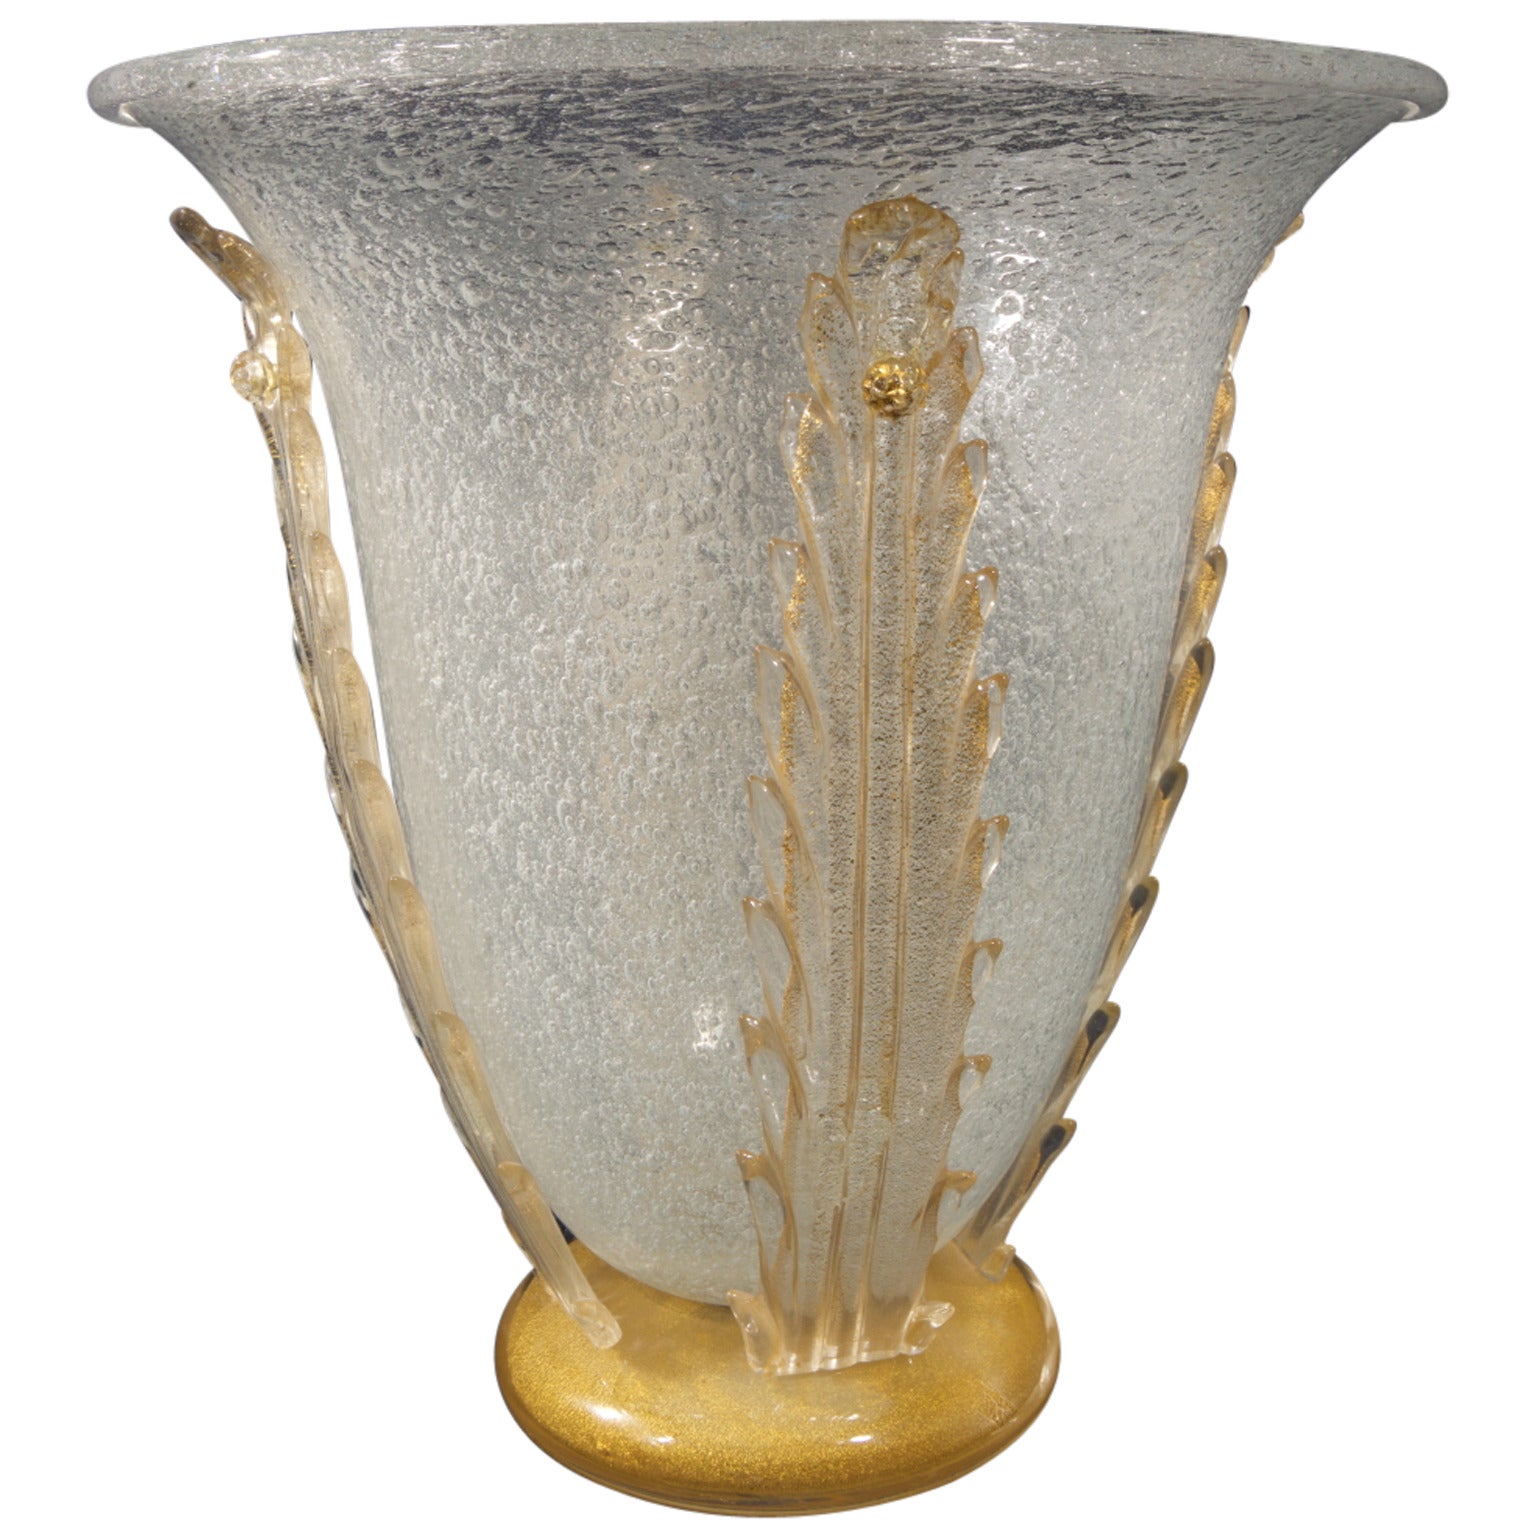 Seguso Midcentury Gold and Crystal Murano Glass Vase, 1970